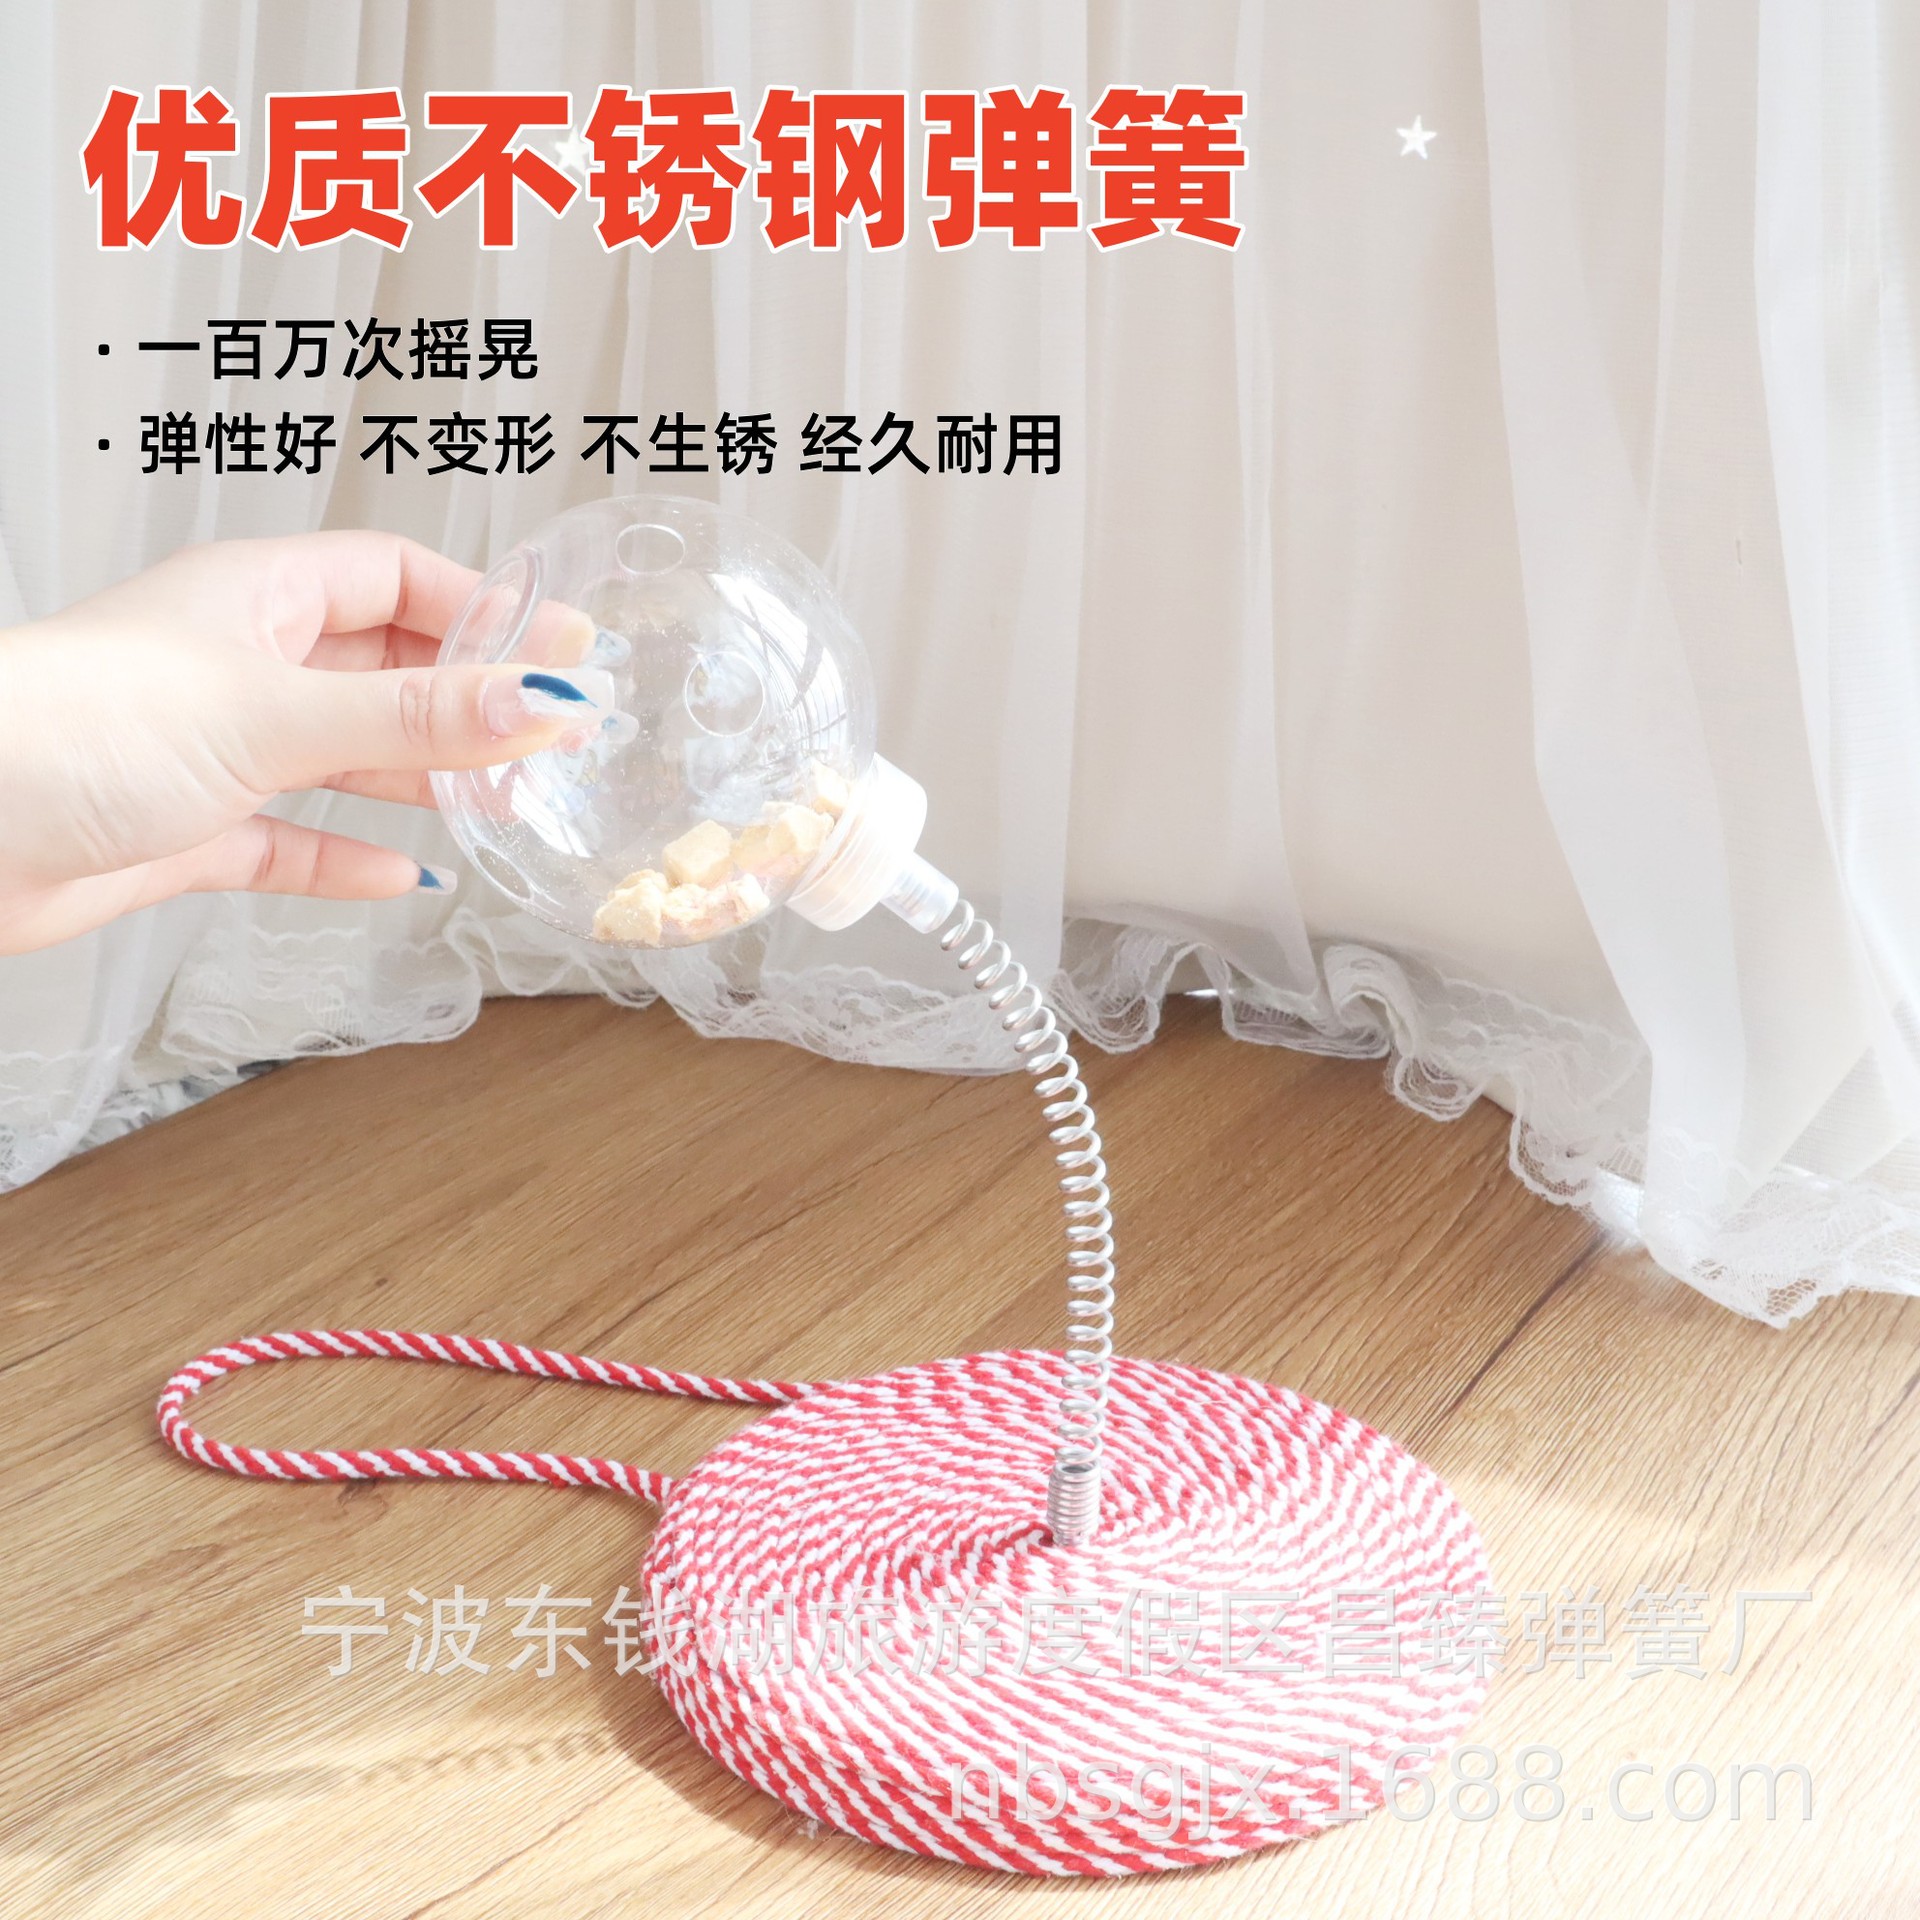 Manufacturers Produce Cat Toy Spring Food Dropping Ball Cat Scratch Board Dual-Use Anti-Stuffy Artifact Cat Pet Supplies Amazon